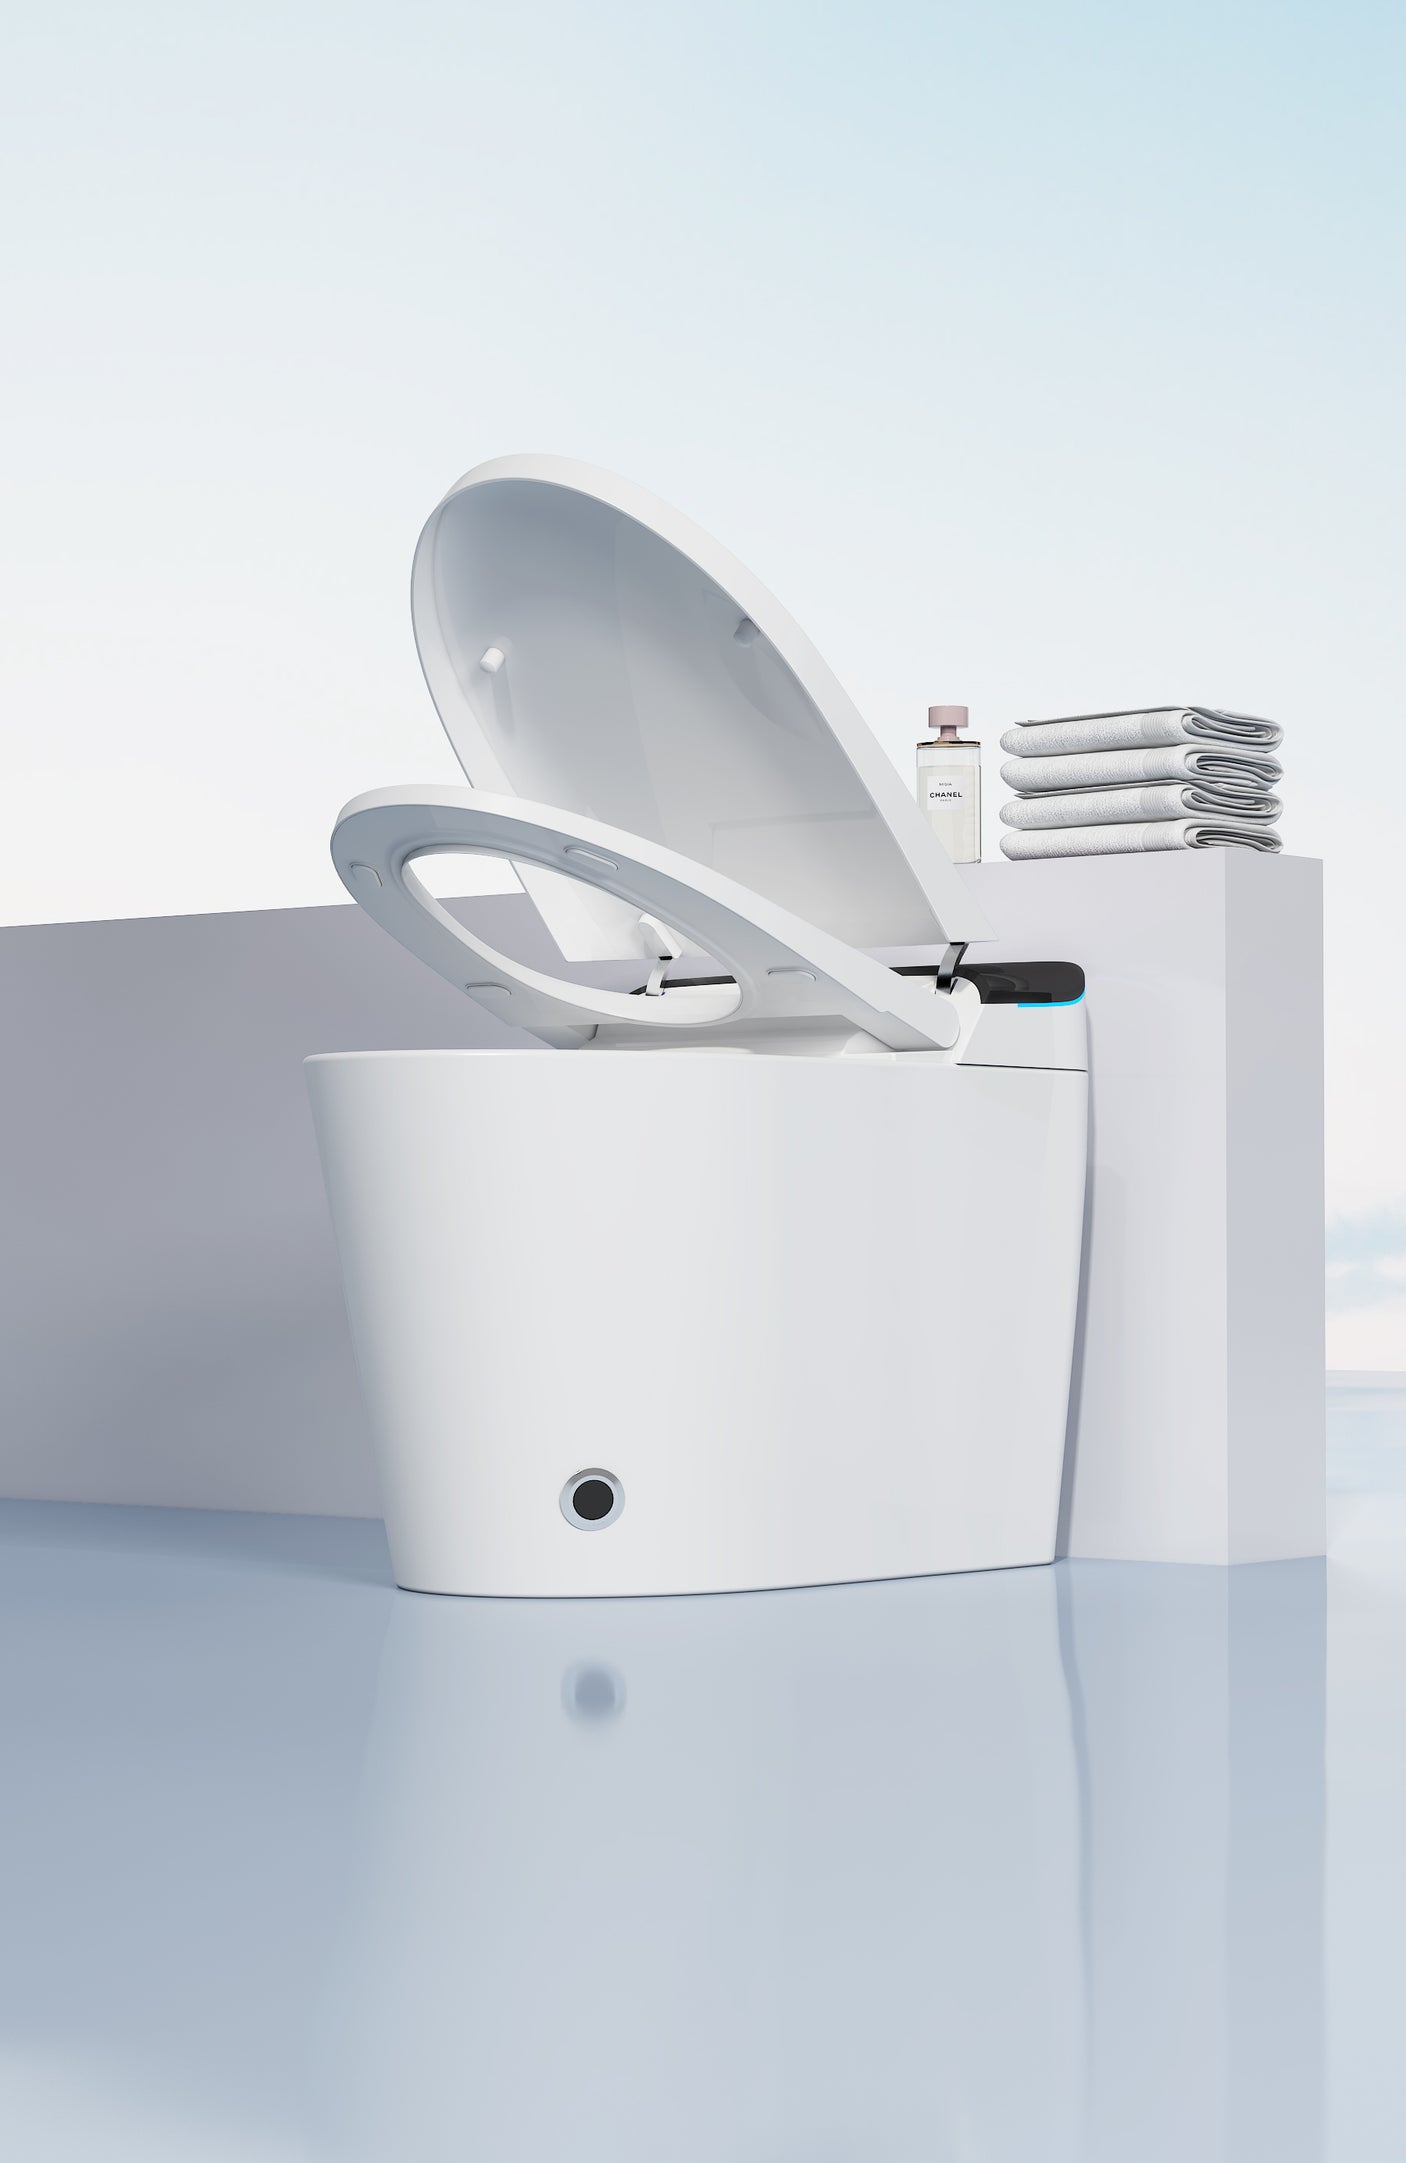 Smart toilet with auto flush, foot sensor flush, heated seat, warm water, warm air drying, remote Control